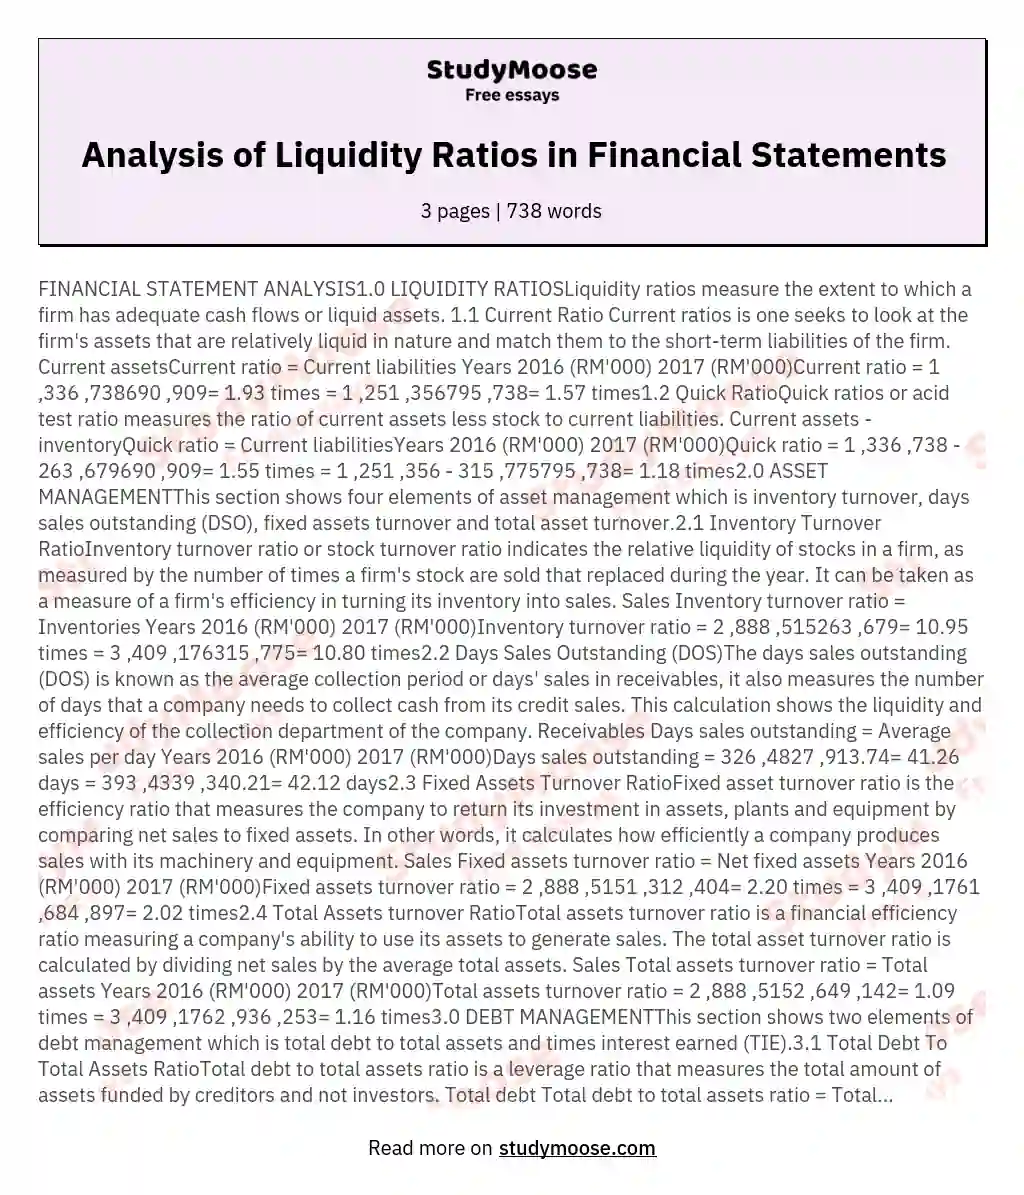 Analysis of Liquidity Ratios in Financial Statements